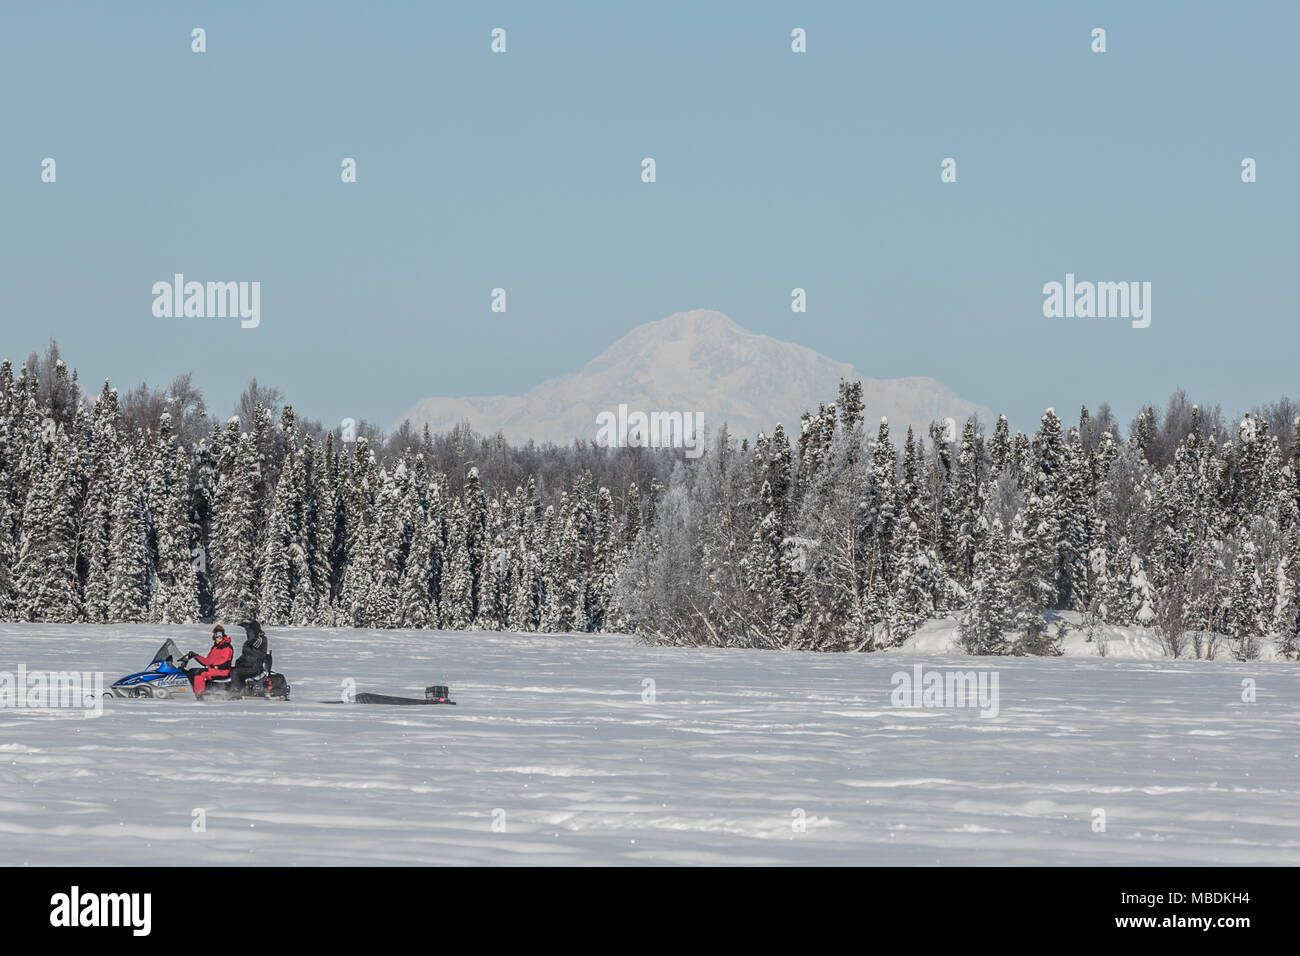 Snow machine in foreground and Denali in background at Willow Lake Stock Photo